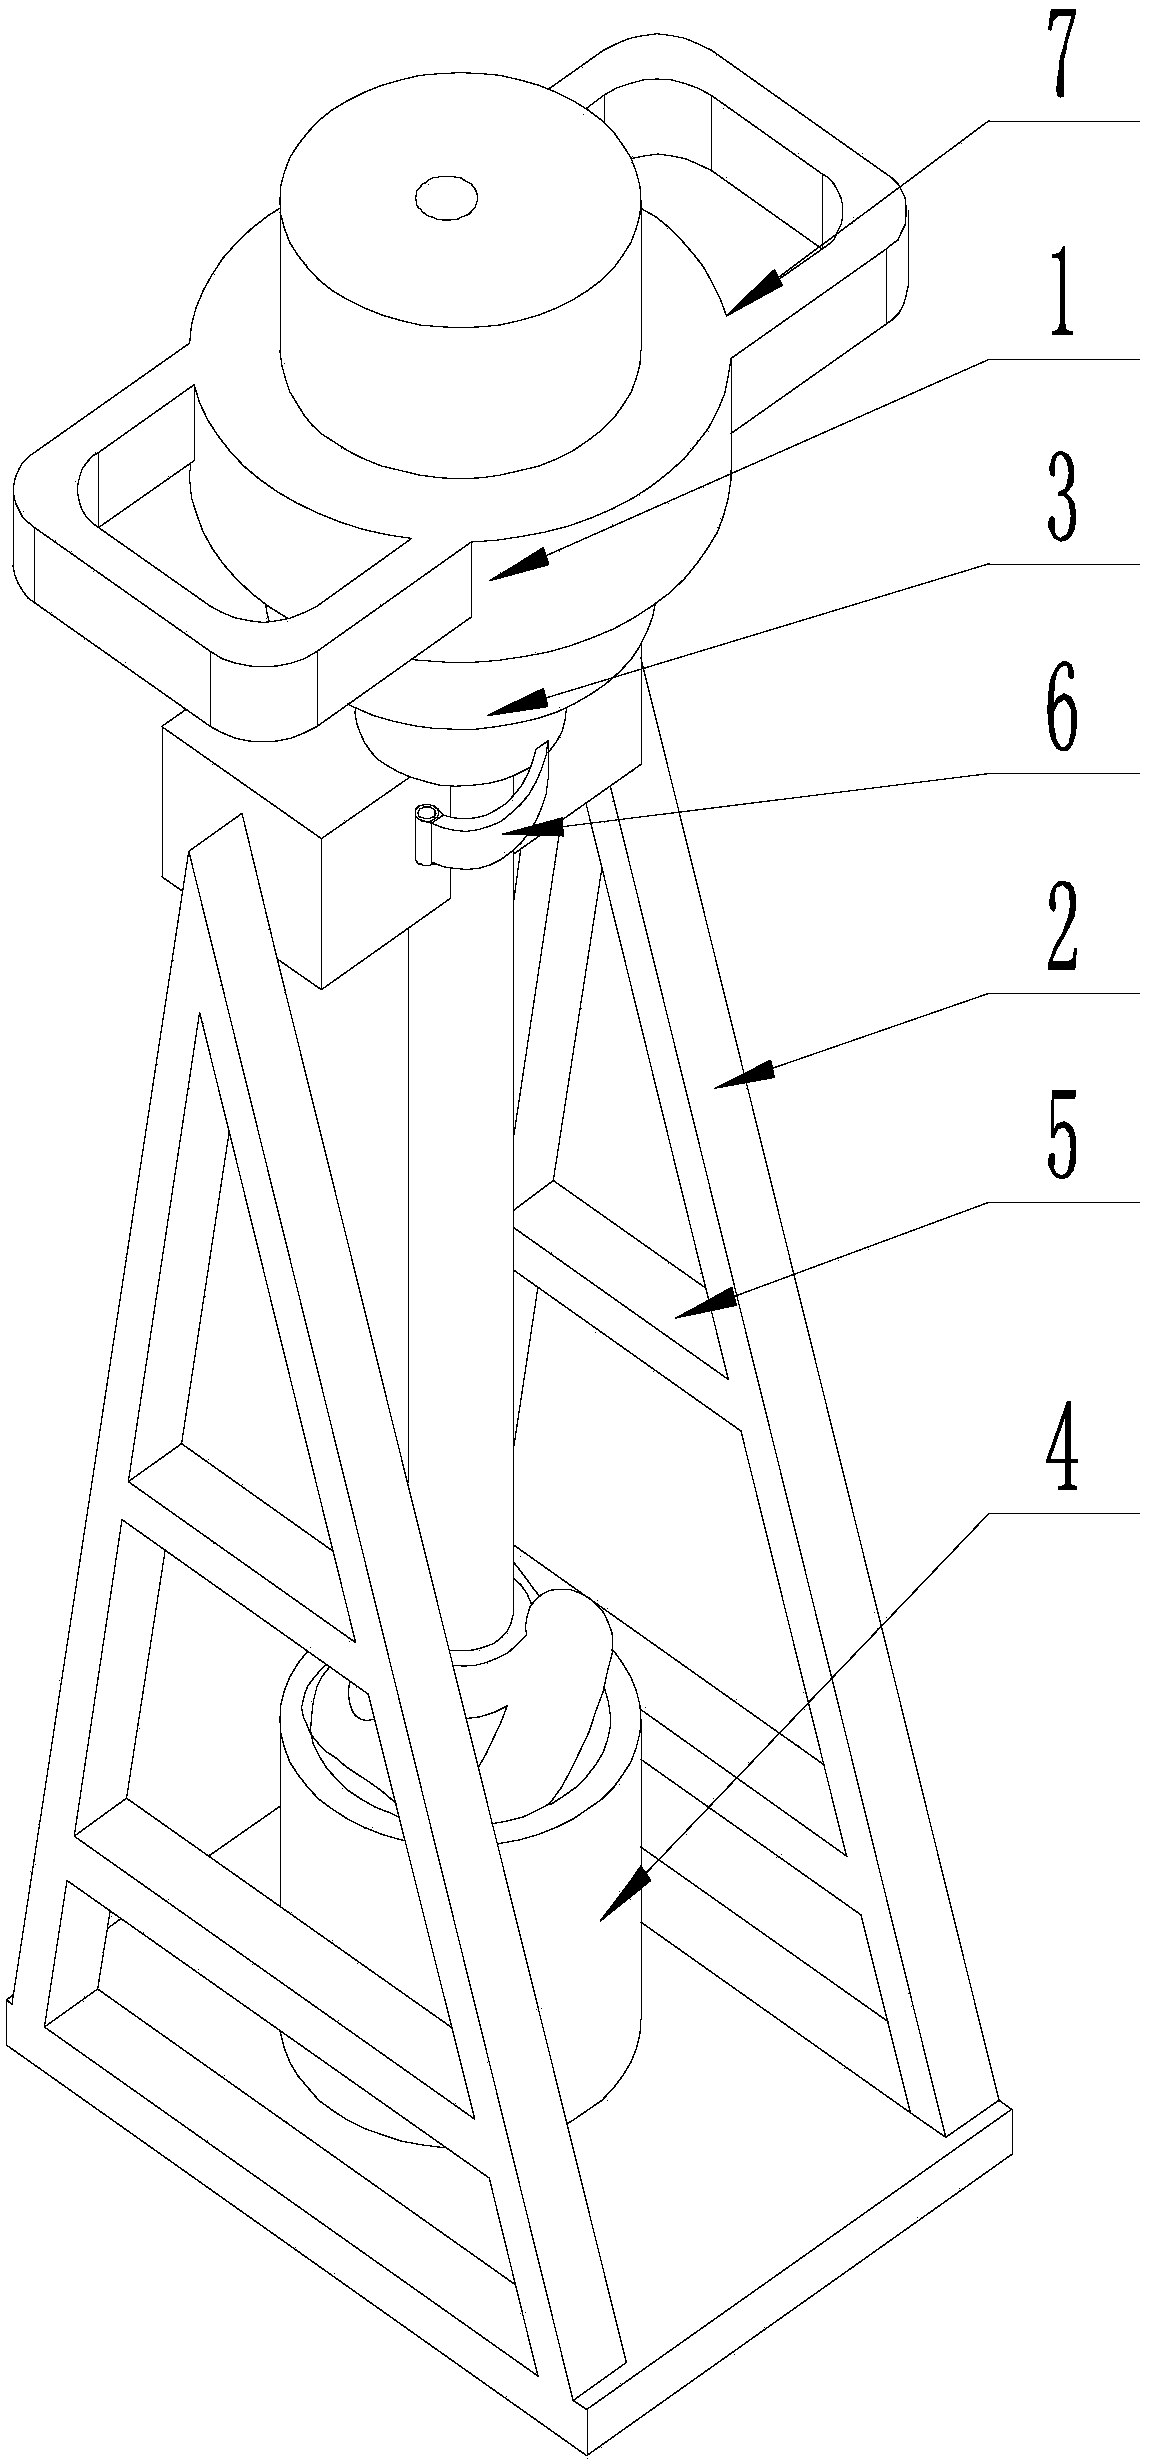 A supporting mechanism preventing chippings from adhering to a stirrer